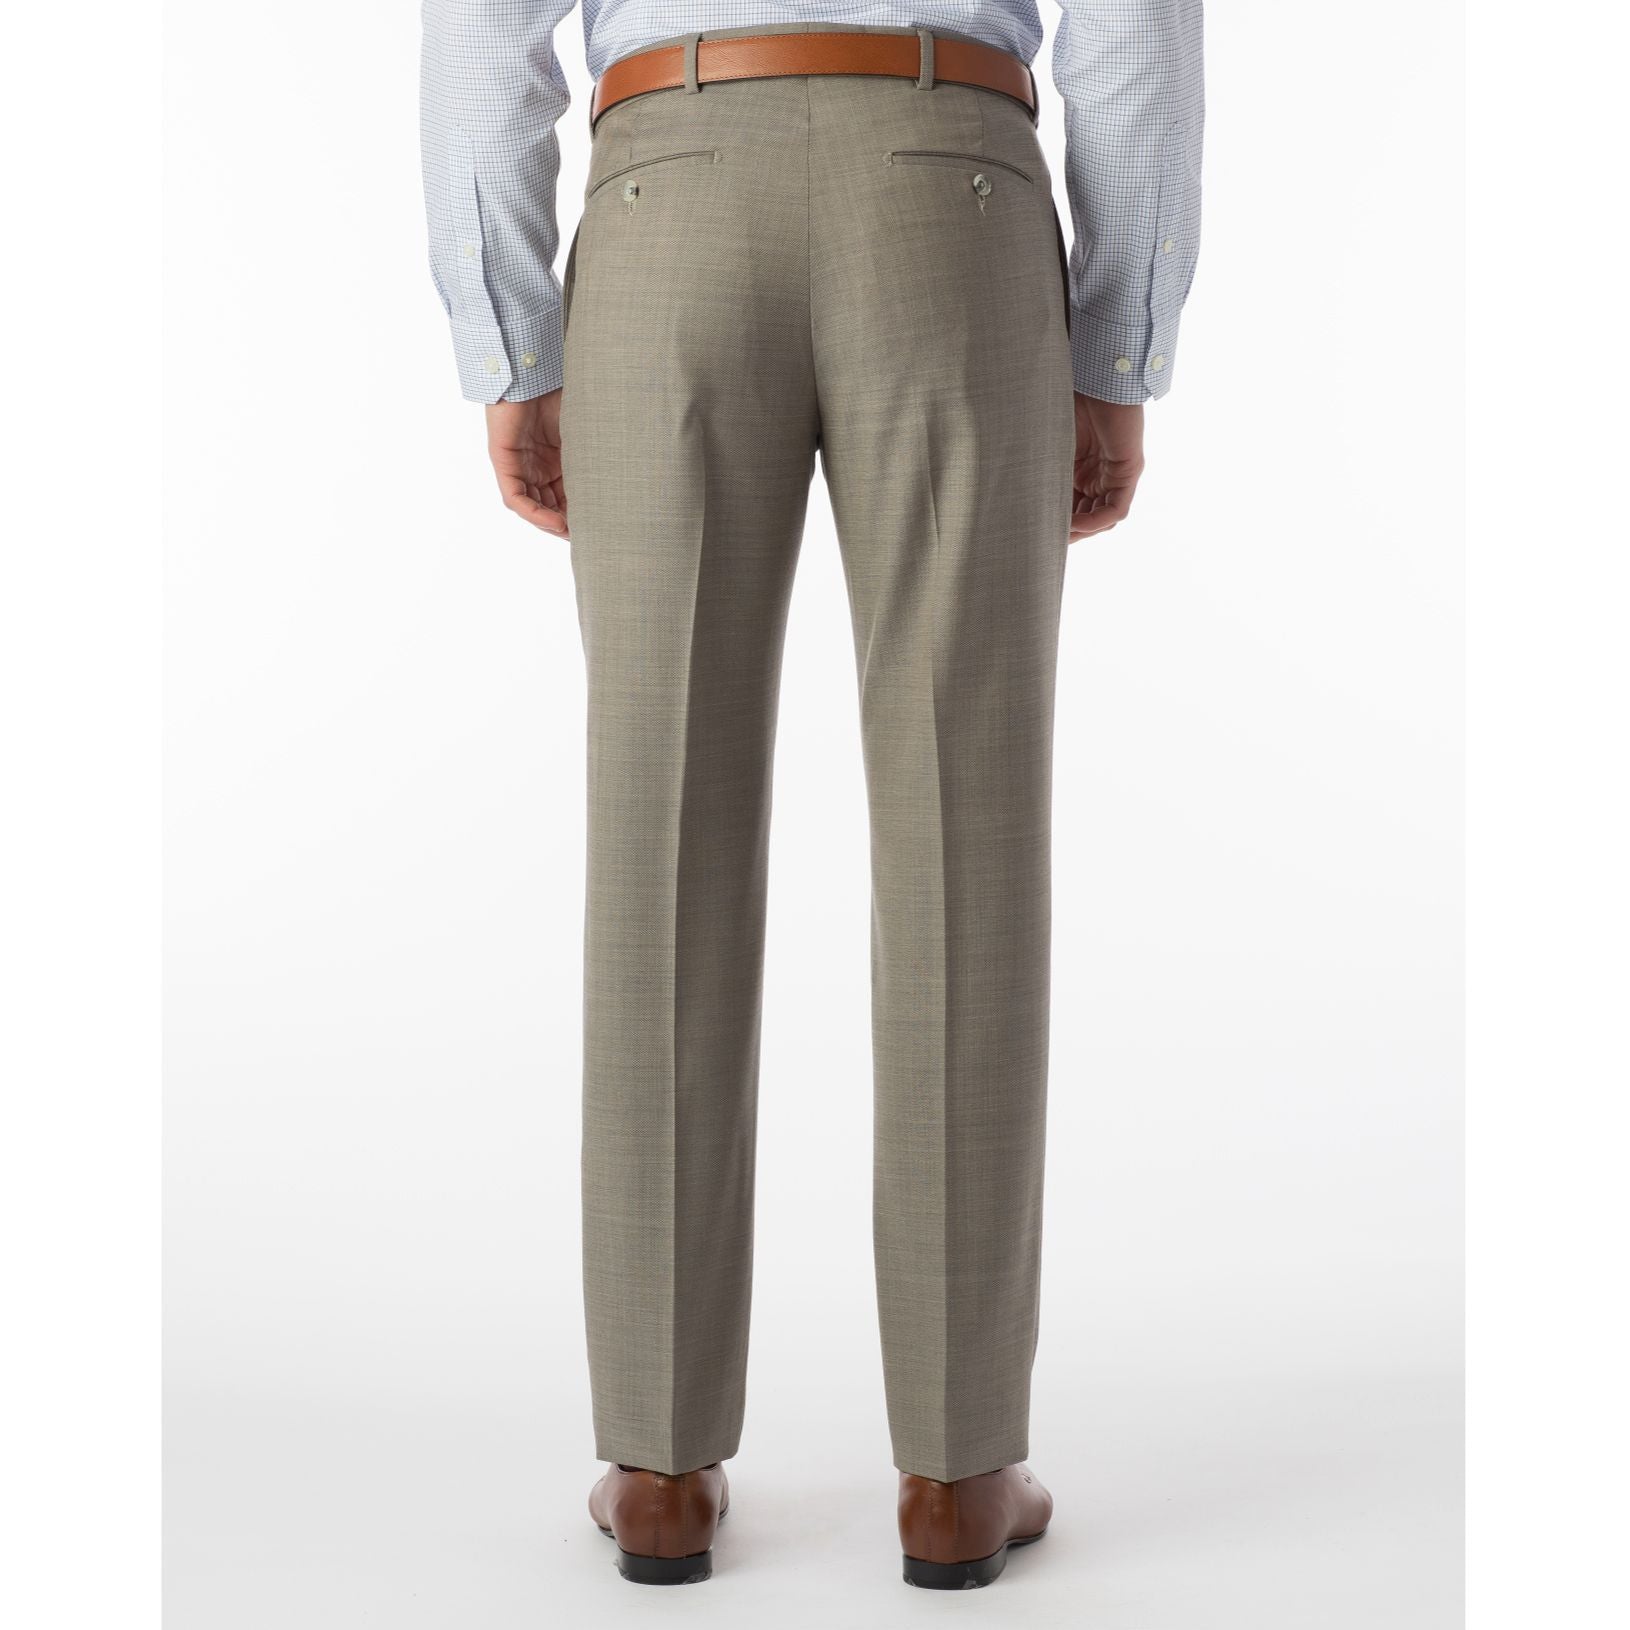 Sharkskin Super 120s Worsted Wool Comfort-EZE Trouser in British Tan (Flat Front Models) by Ballin